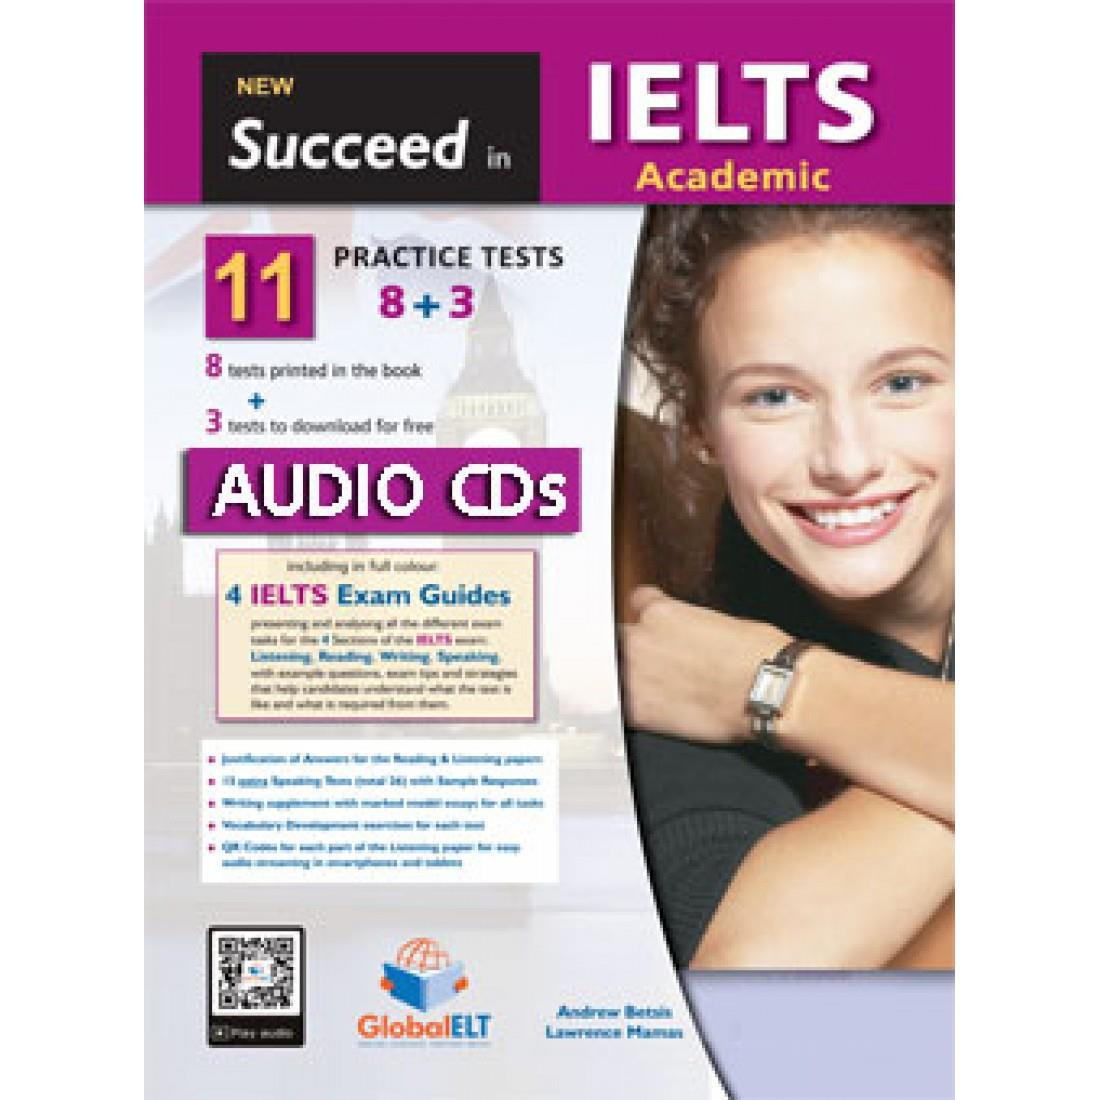 NEW SUCCEED IN IELTS ACADEMIC 11(8+3) PRACTICE TESTS MP3 CD